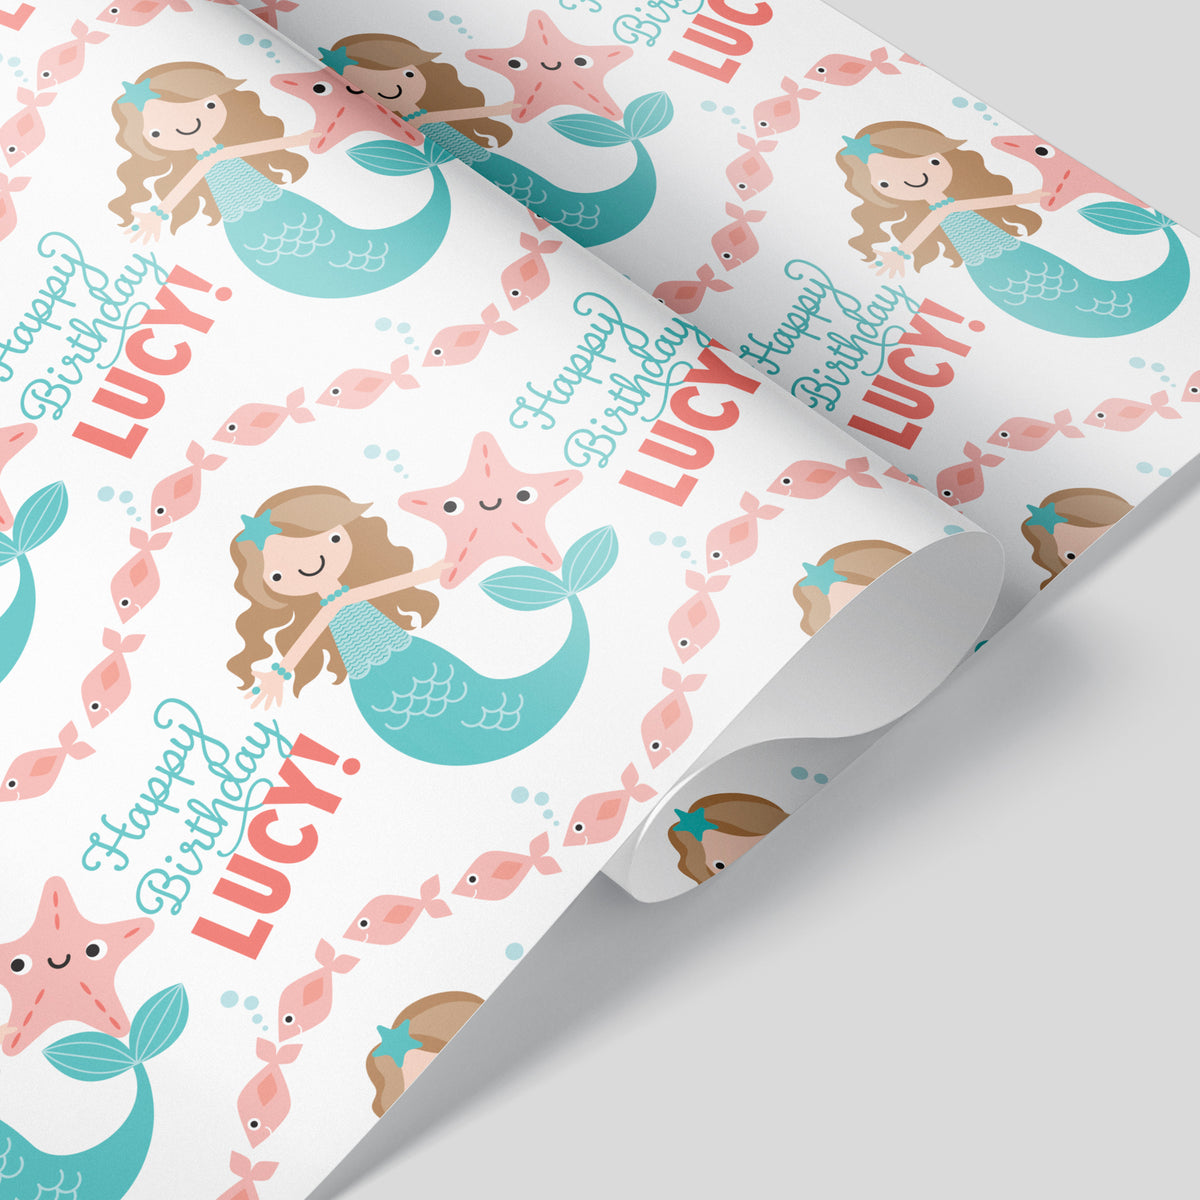 Mermaid Birthday Personalized Name Wrapping Paper - ROBIN